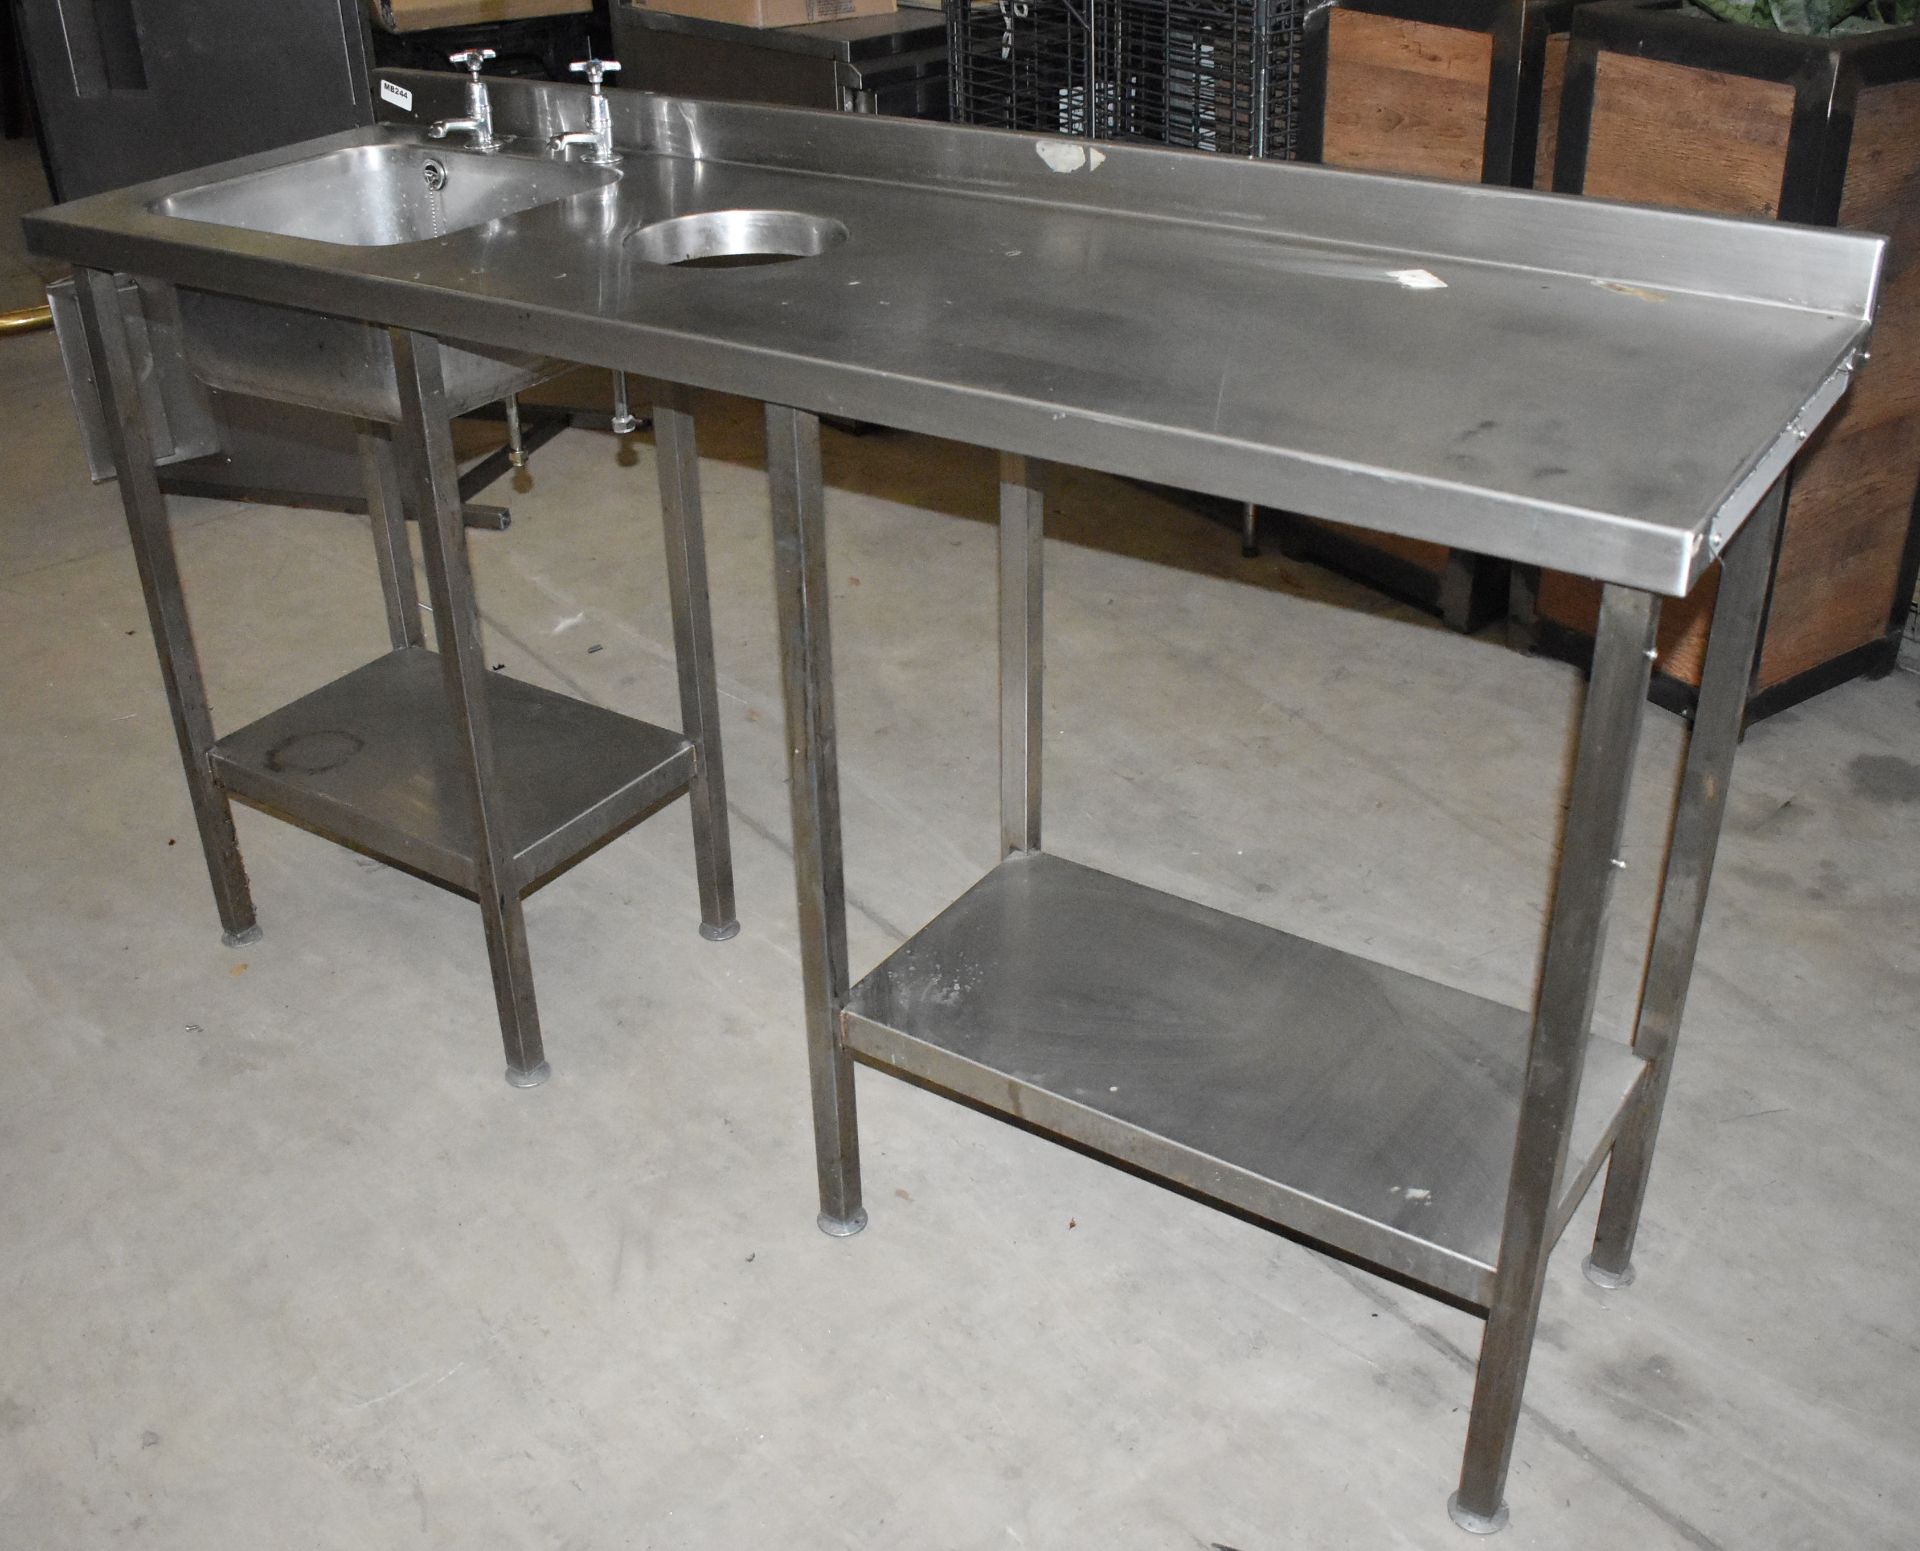 1 x Stainless Steel Wash Basin Prep Table With Undershelves, Upstand, Basin and Taps and Waste Chute - Image 2 of 5